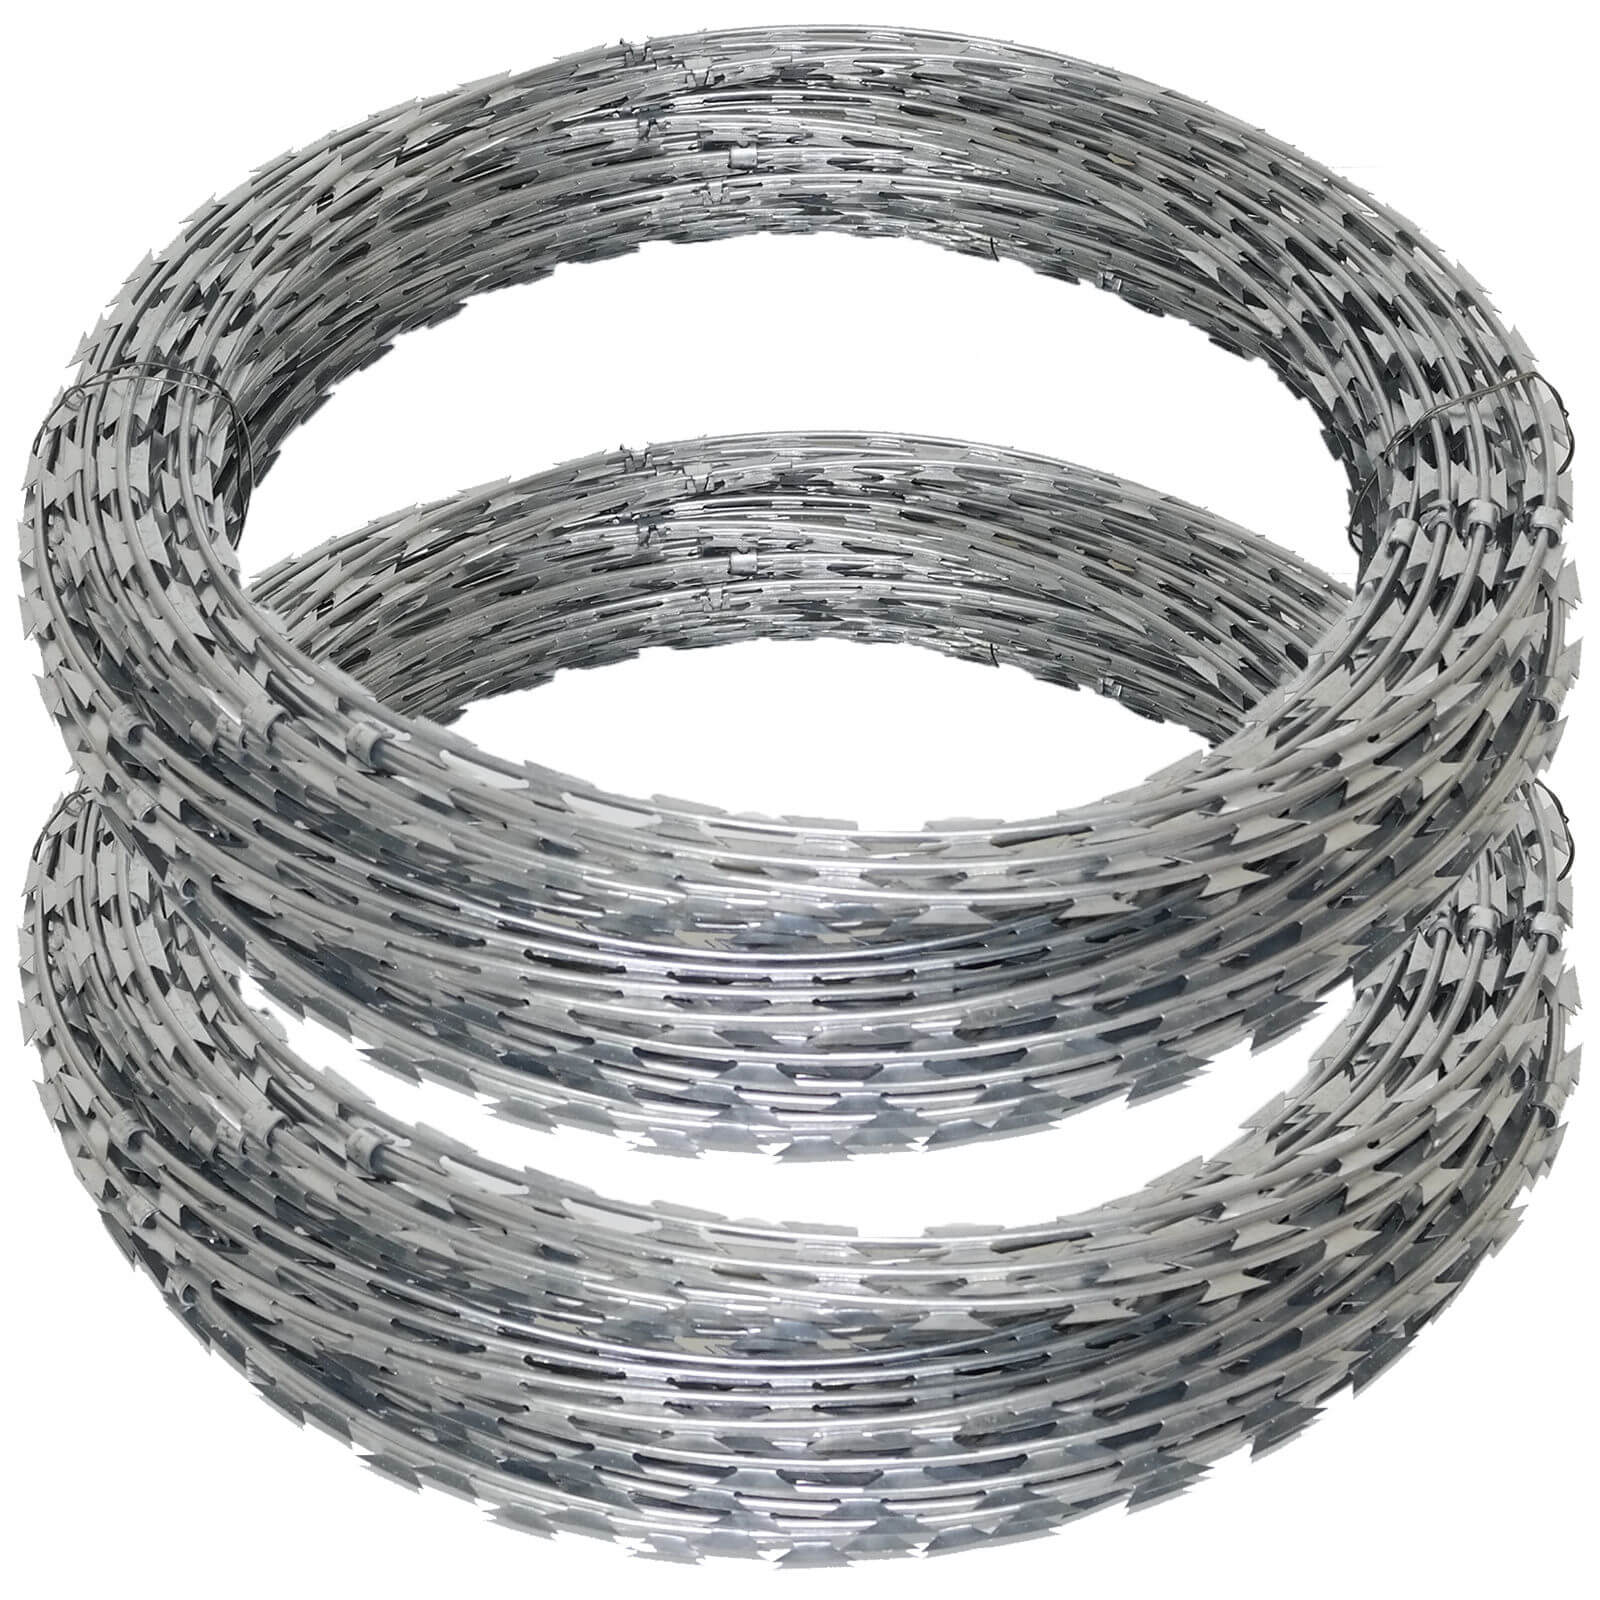 Choose razor wire fencing for a secure environment